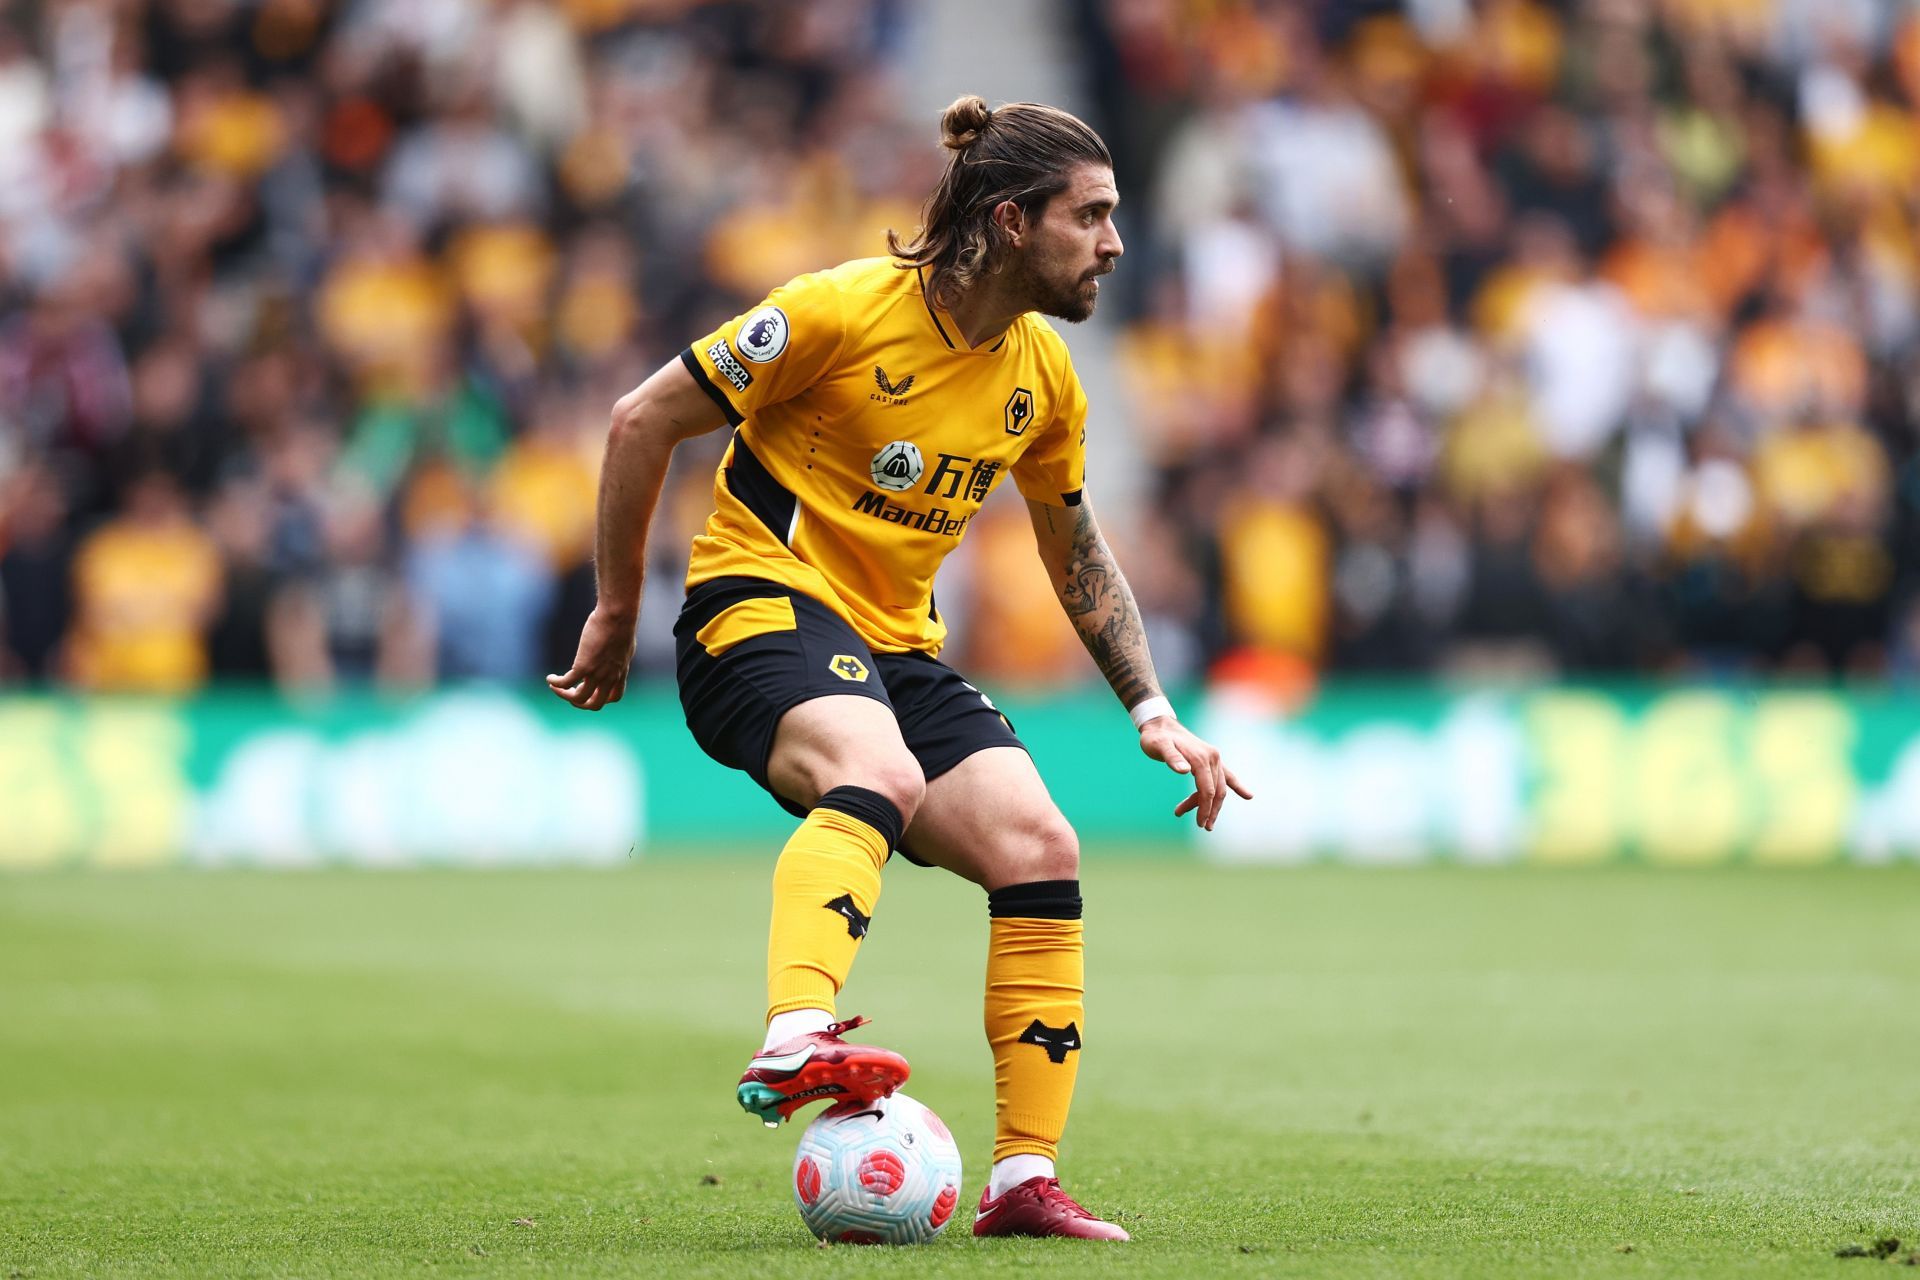 Neves is a key player for Wolverhampton Wanderers